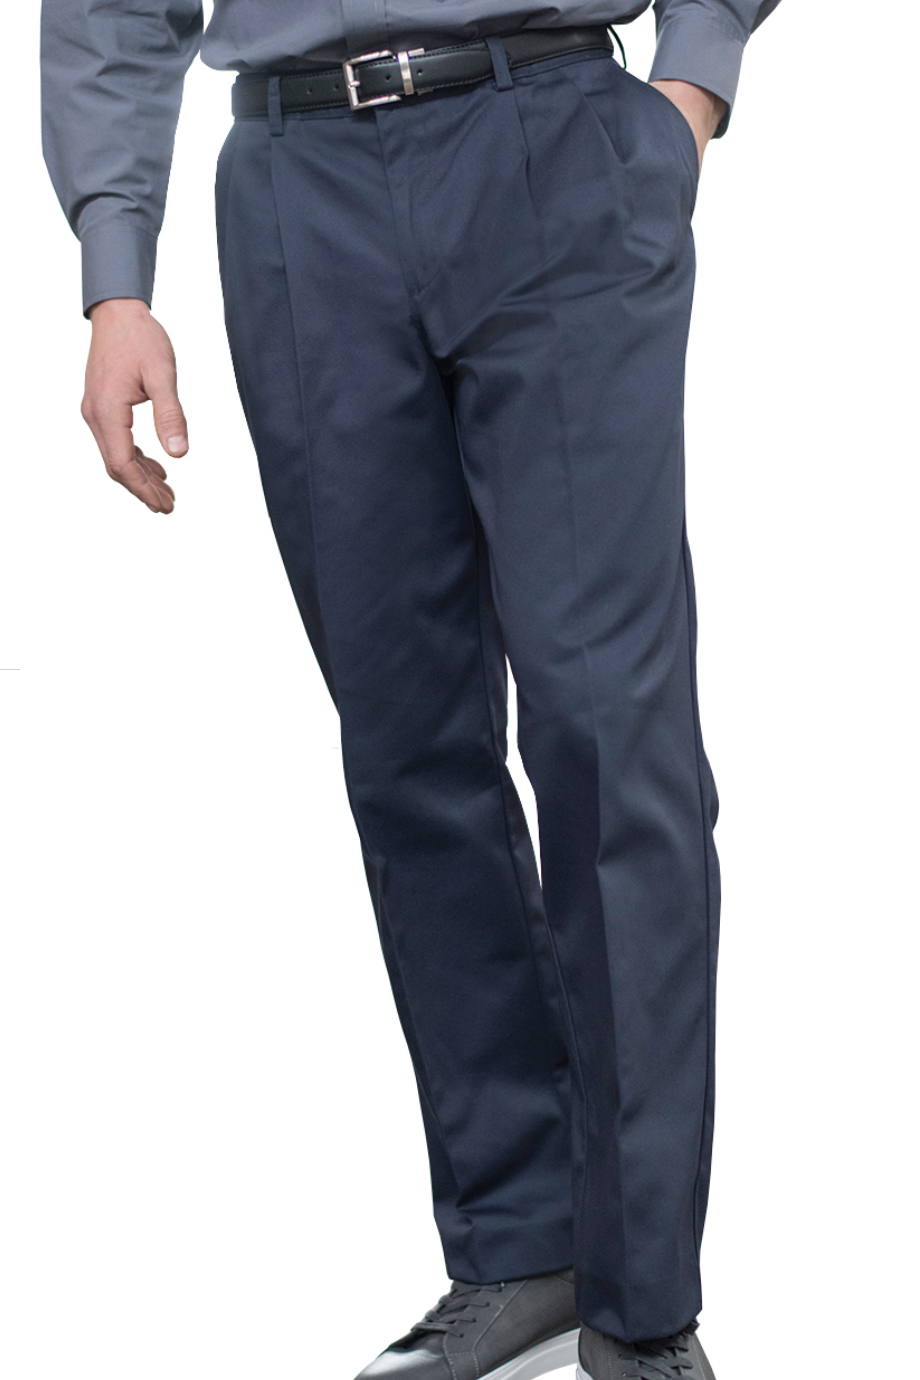 UTILITY CHINO PLEATED FRONT PANT | Edwards Garment